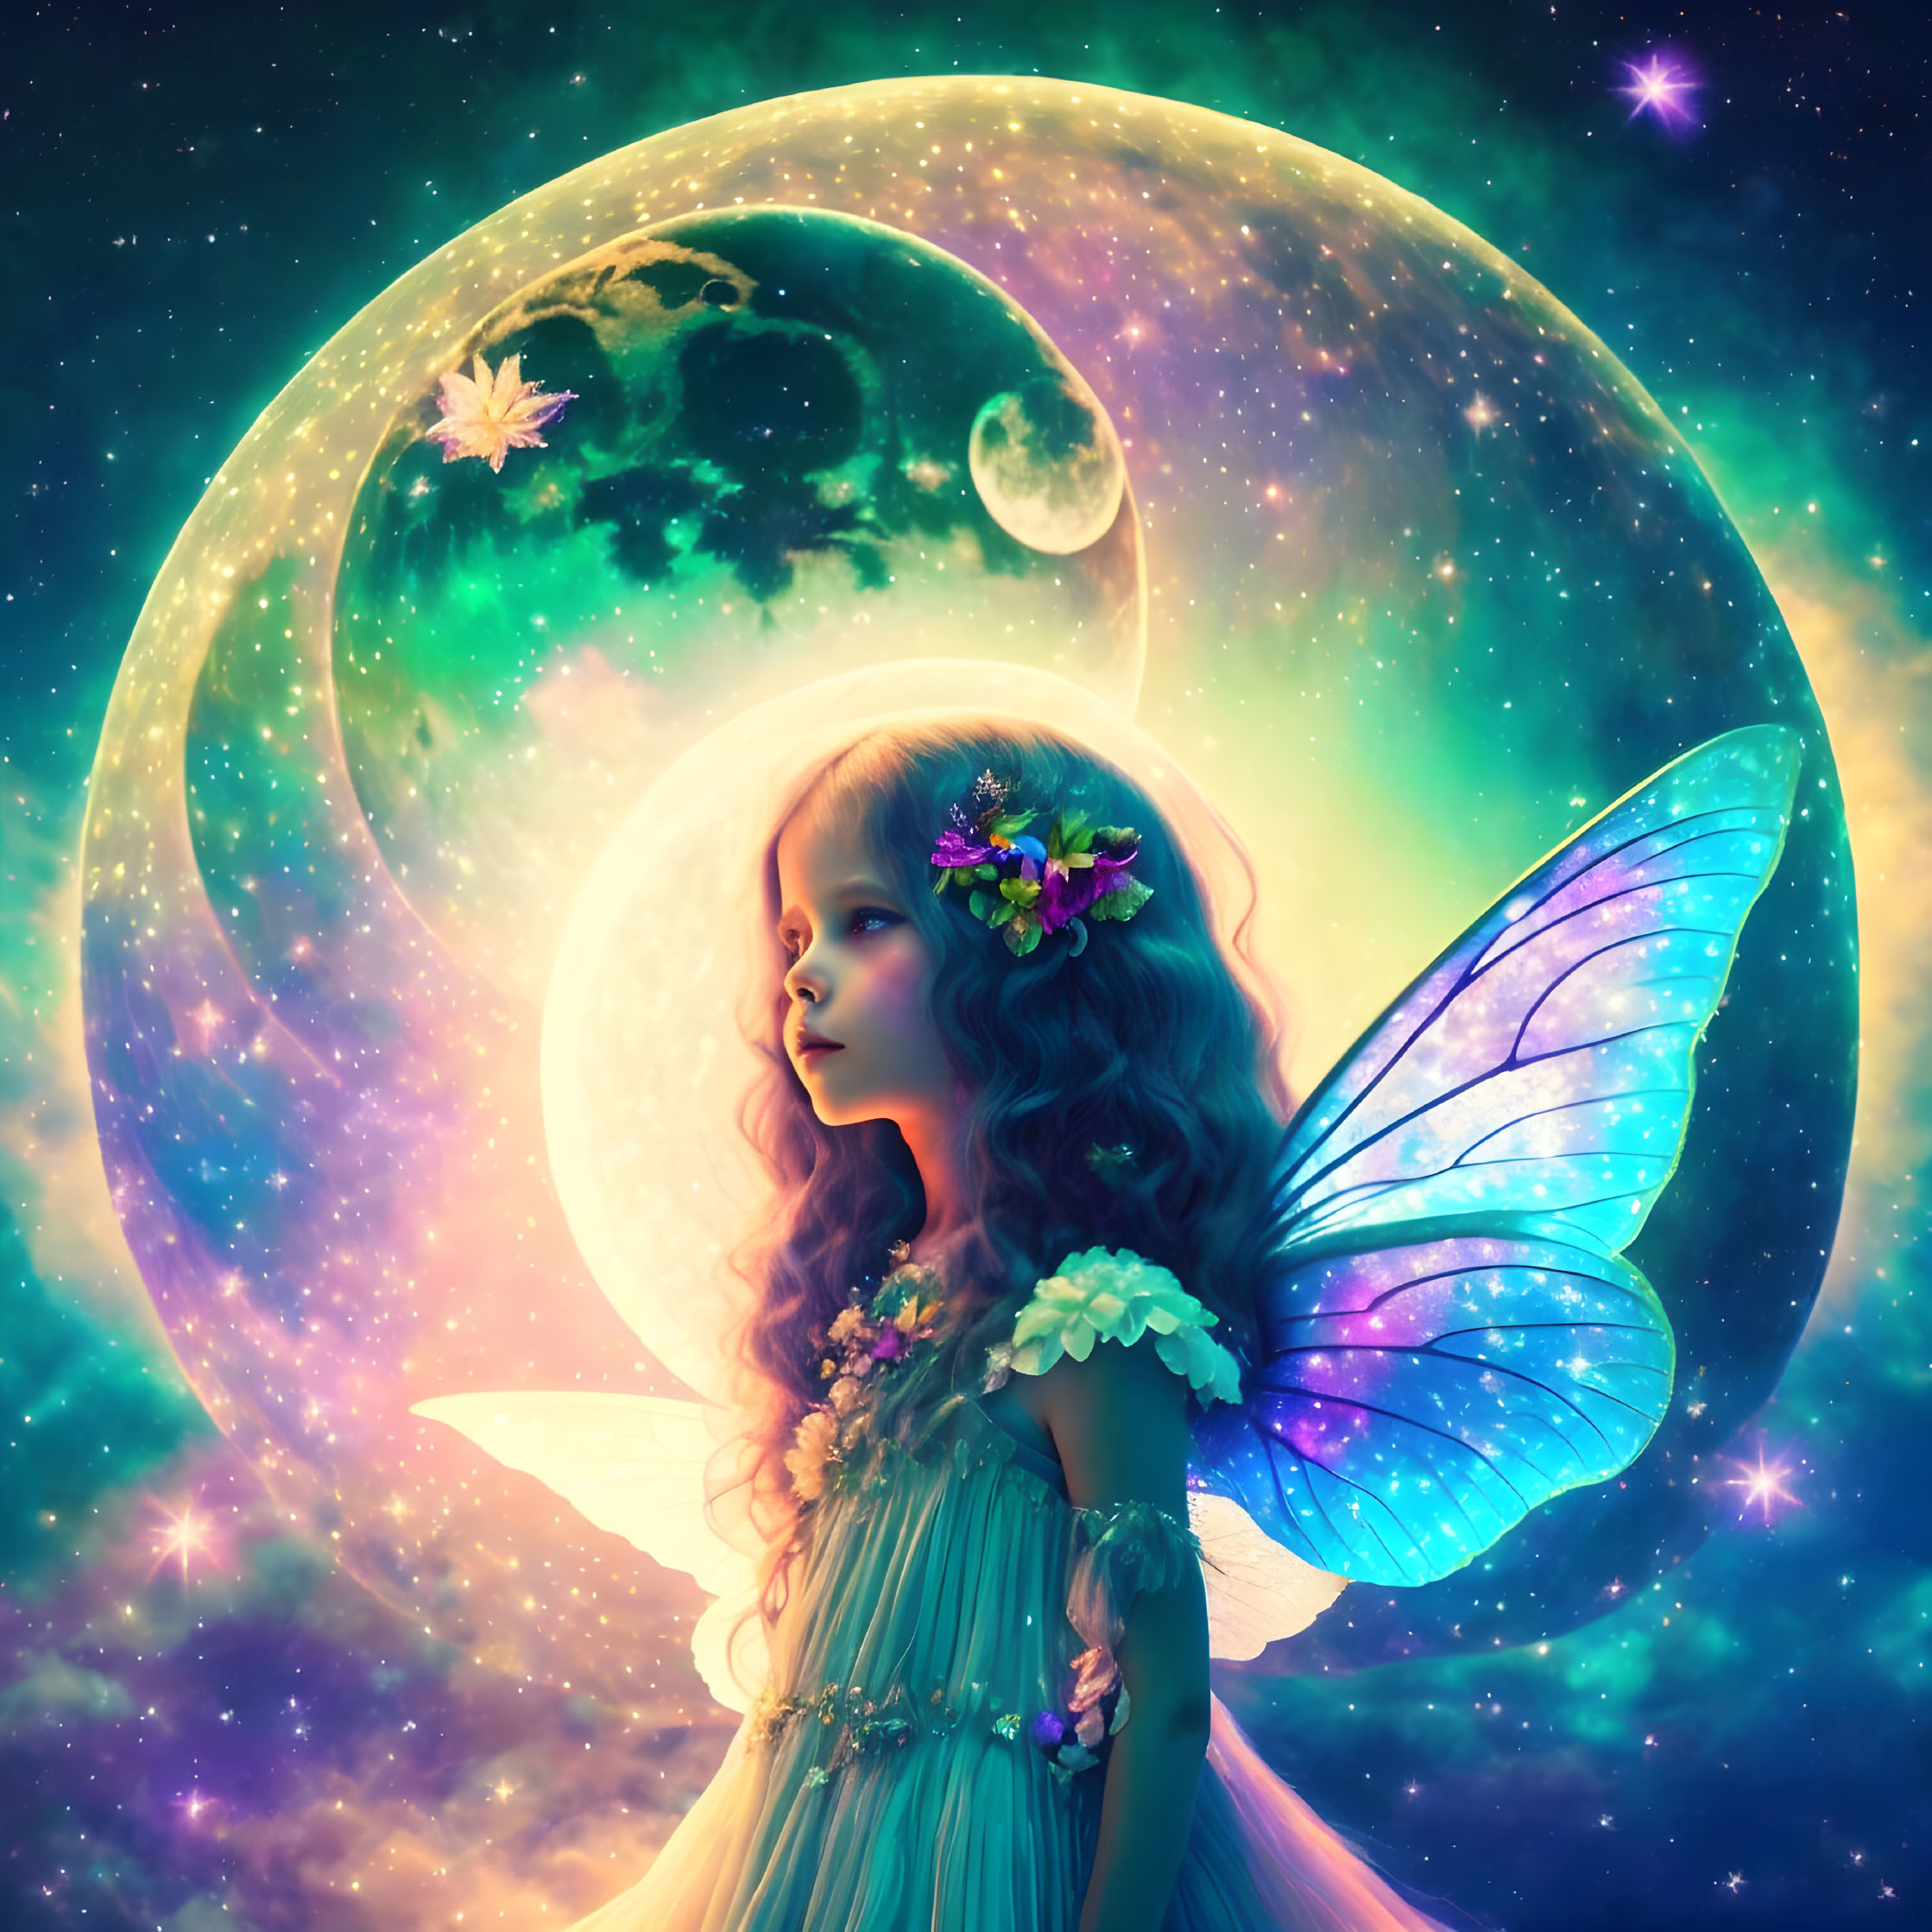 Fantasy illustration of young girl with butterfly wings in starry sky